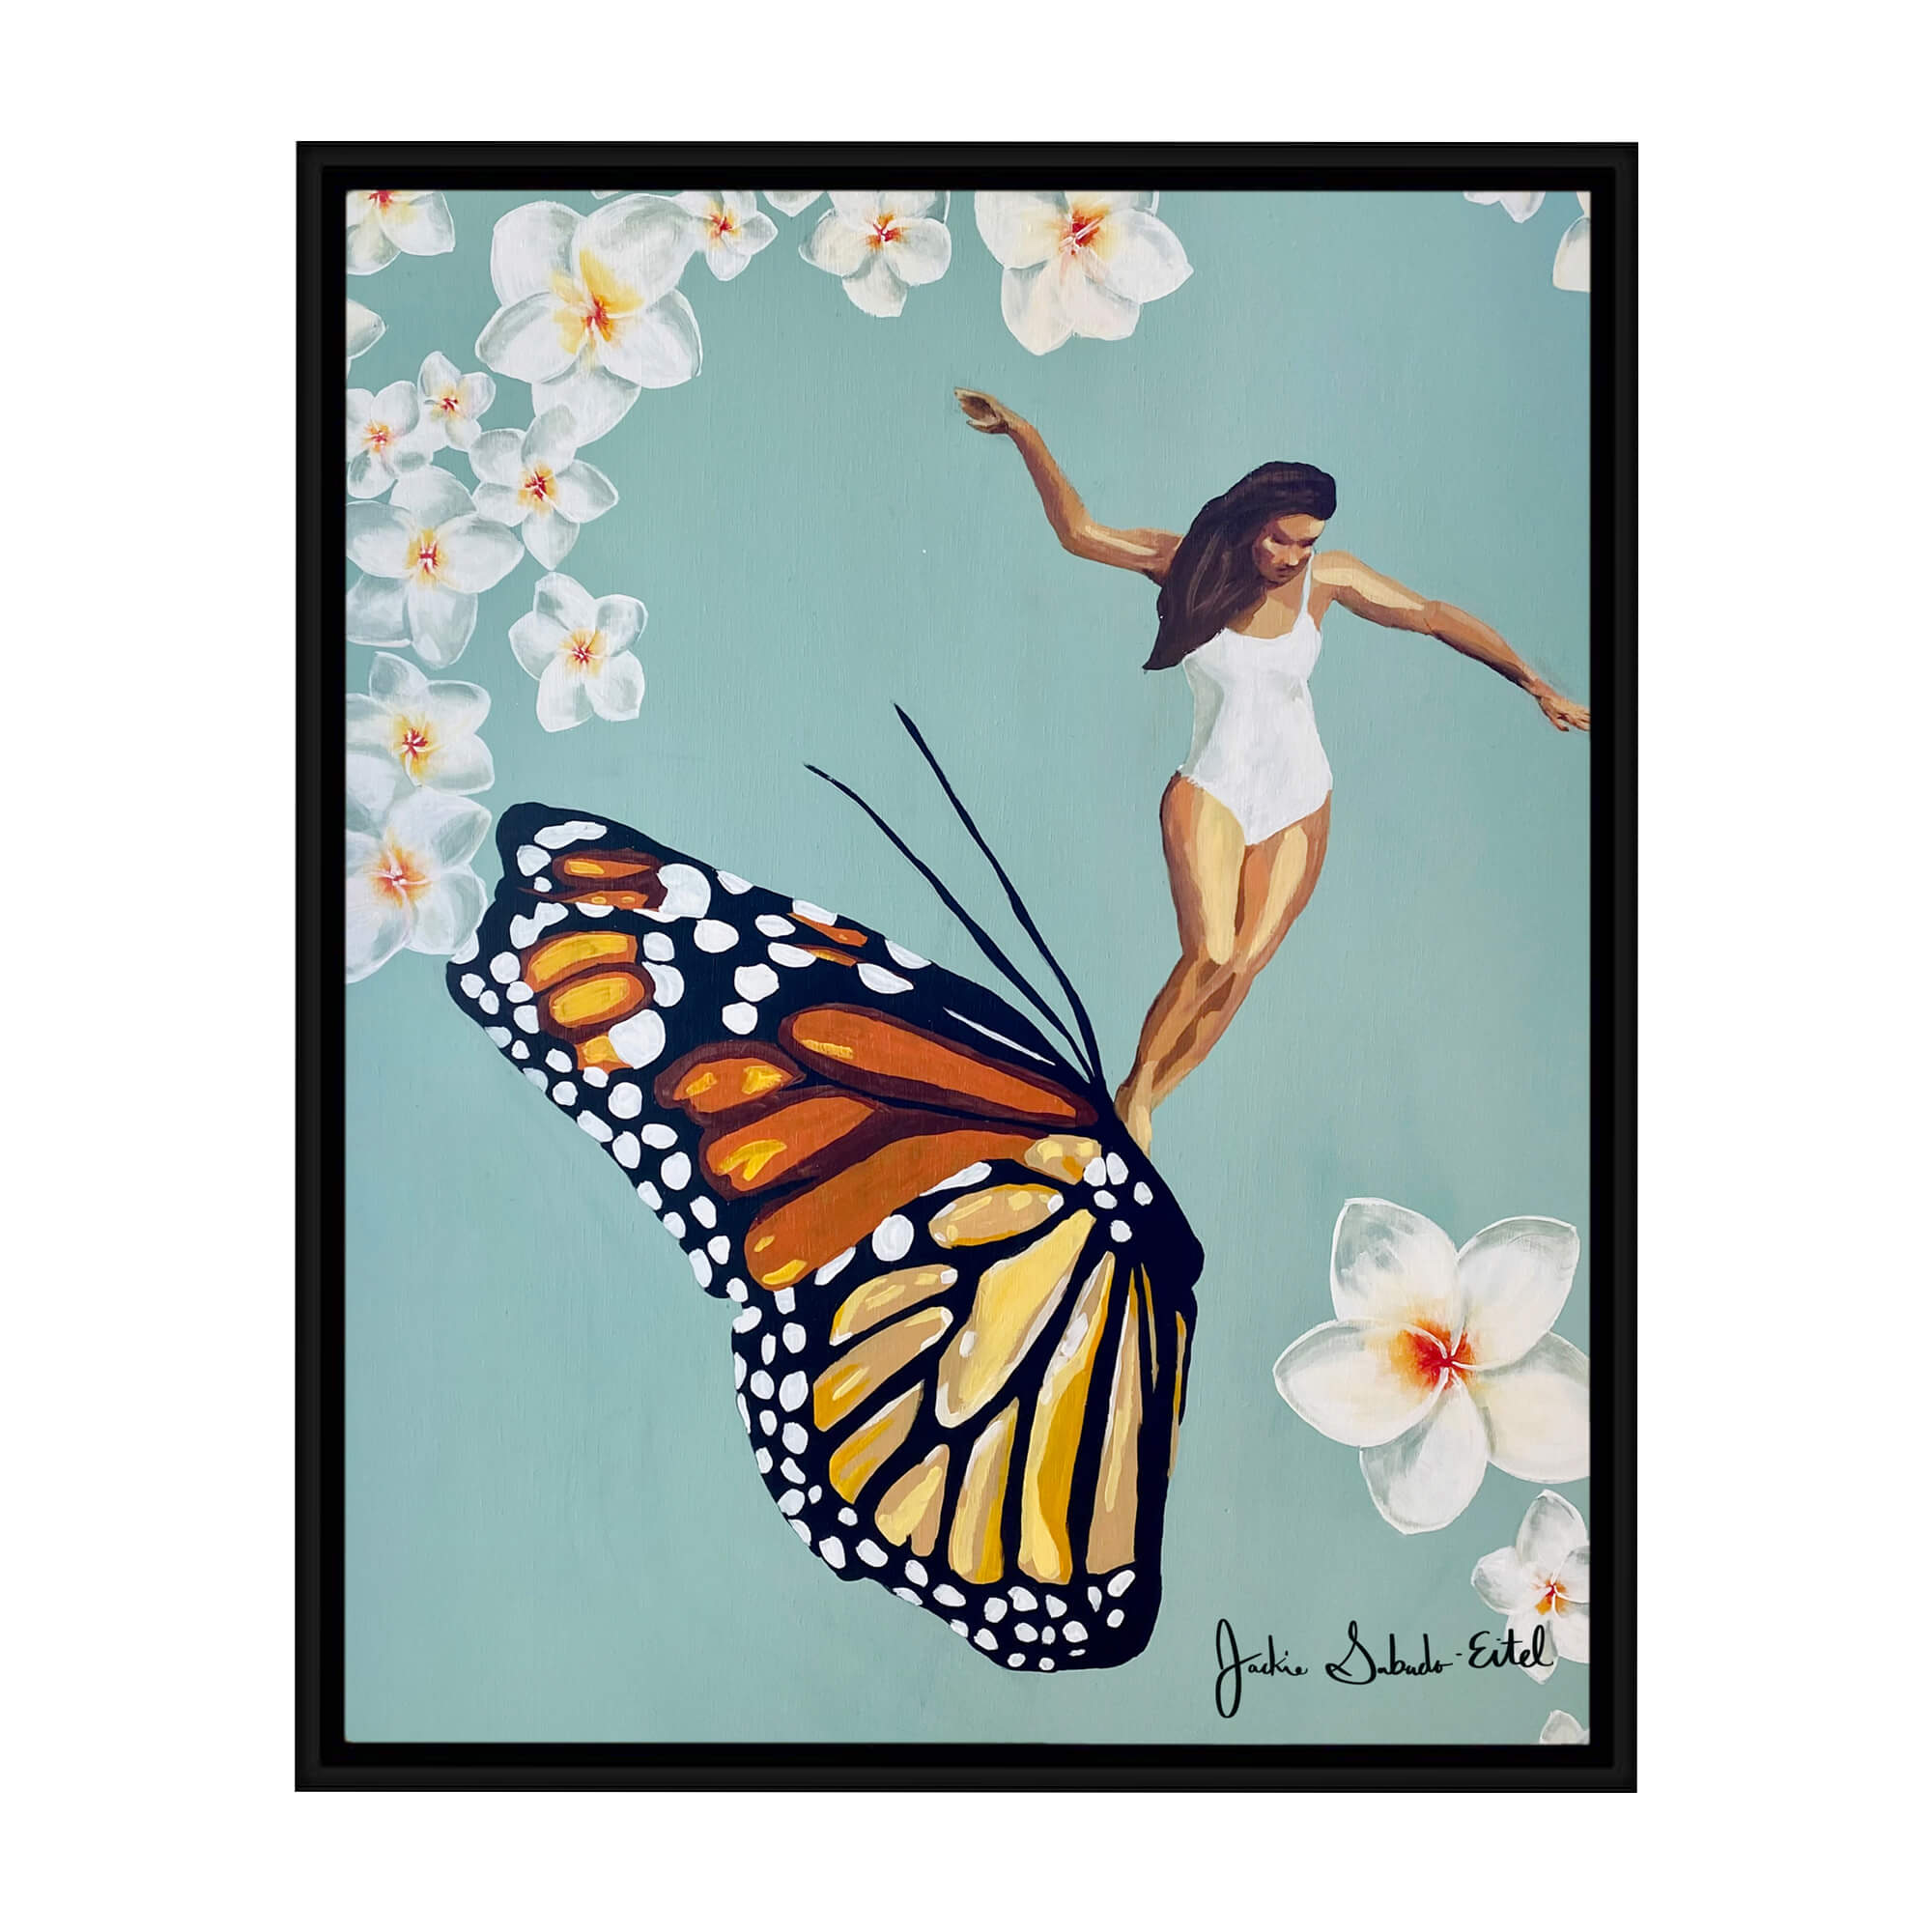 A framed canvas giclée print featuring a woman riding a butterfly framed by plumeria flowers on a pastel teal-hued background by Hawaii artist Jackie Eitel